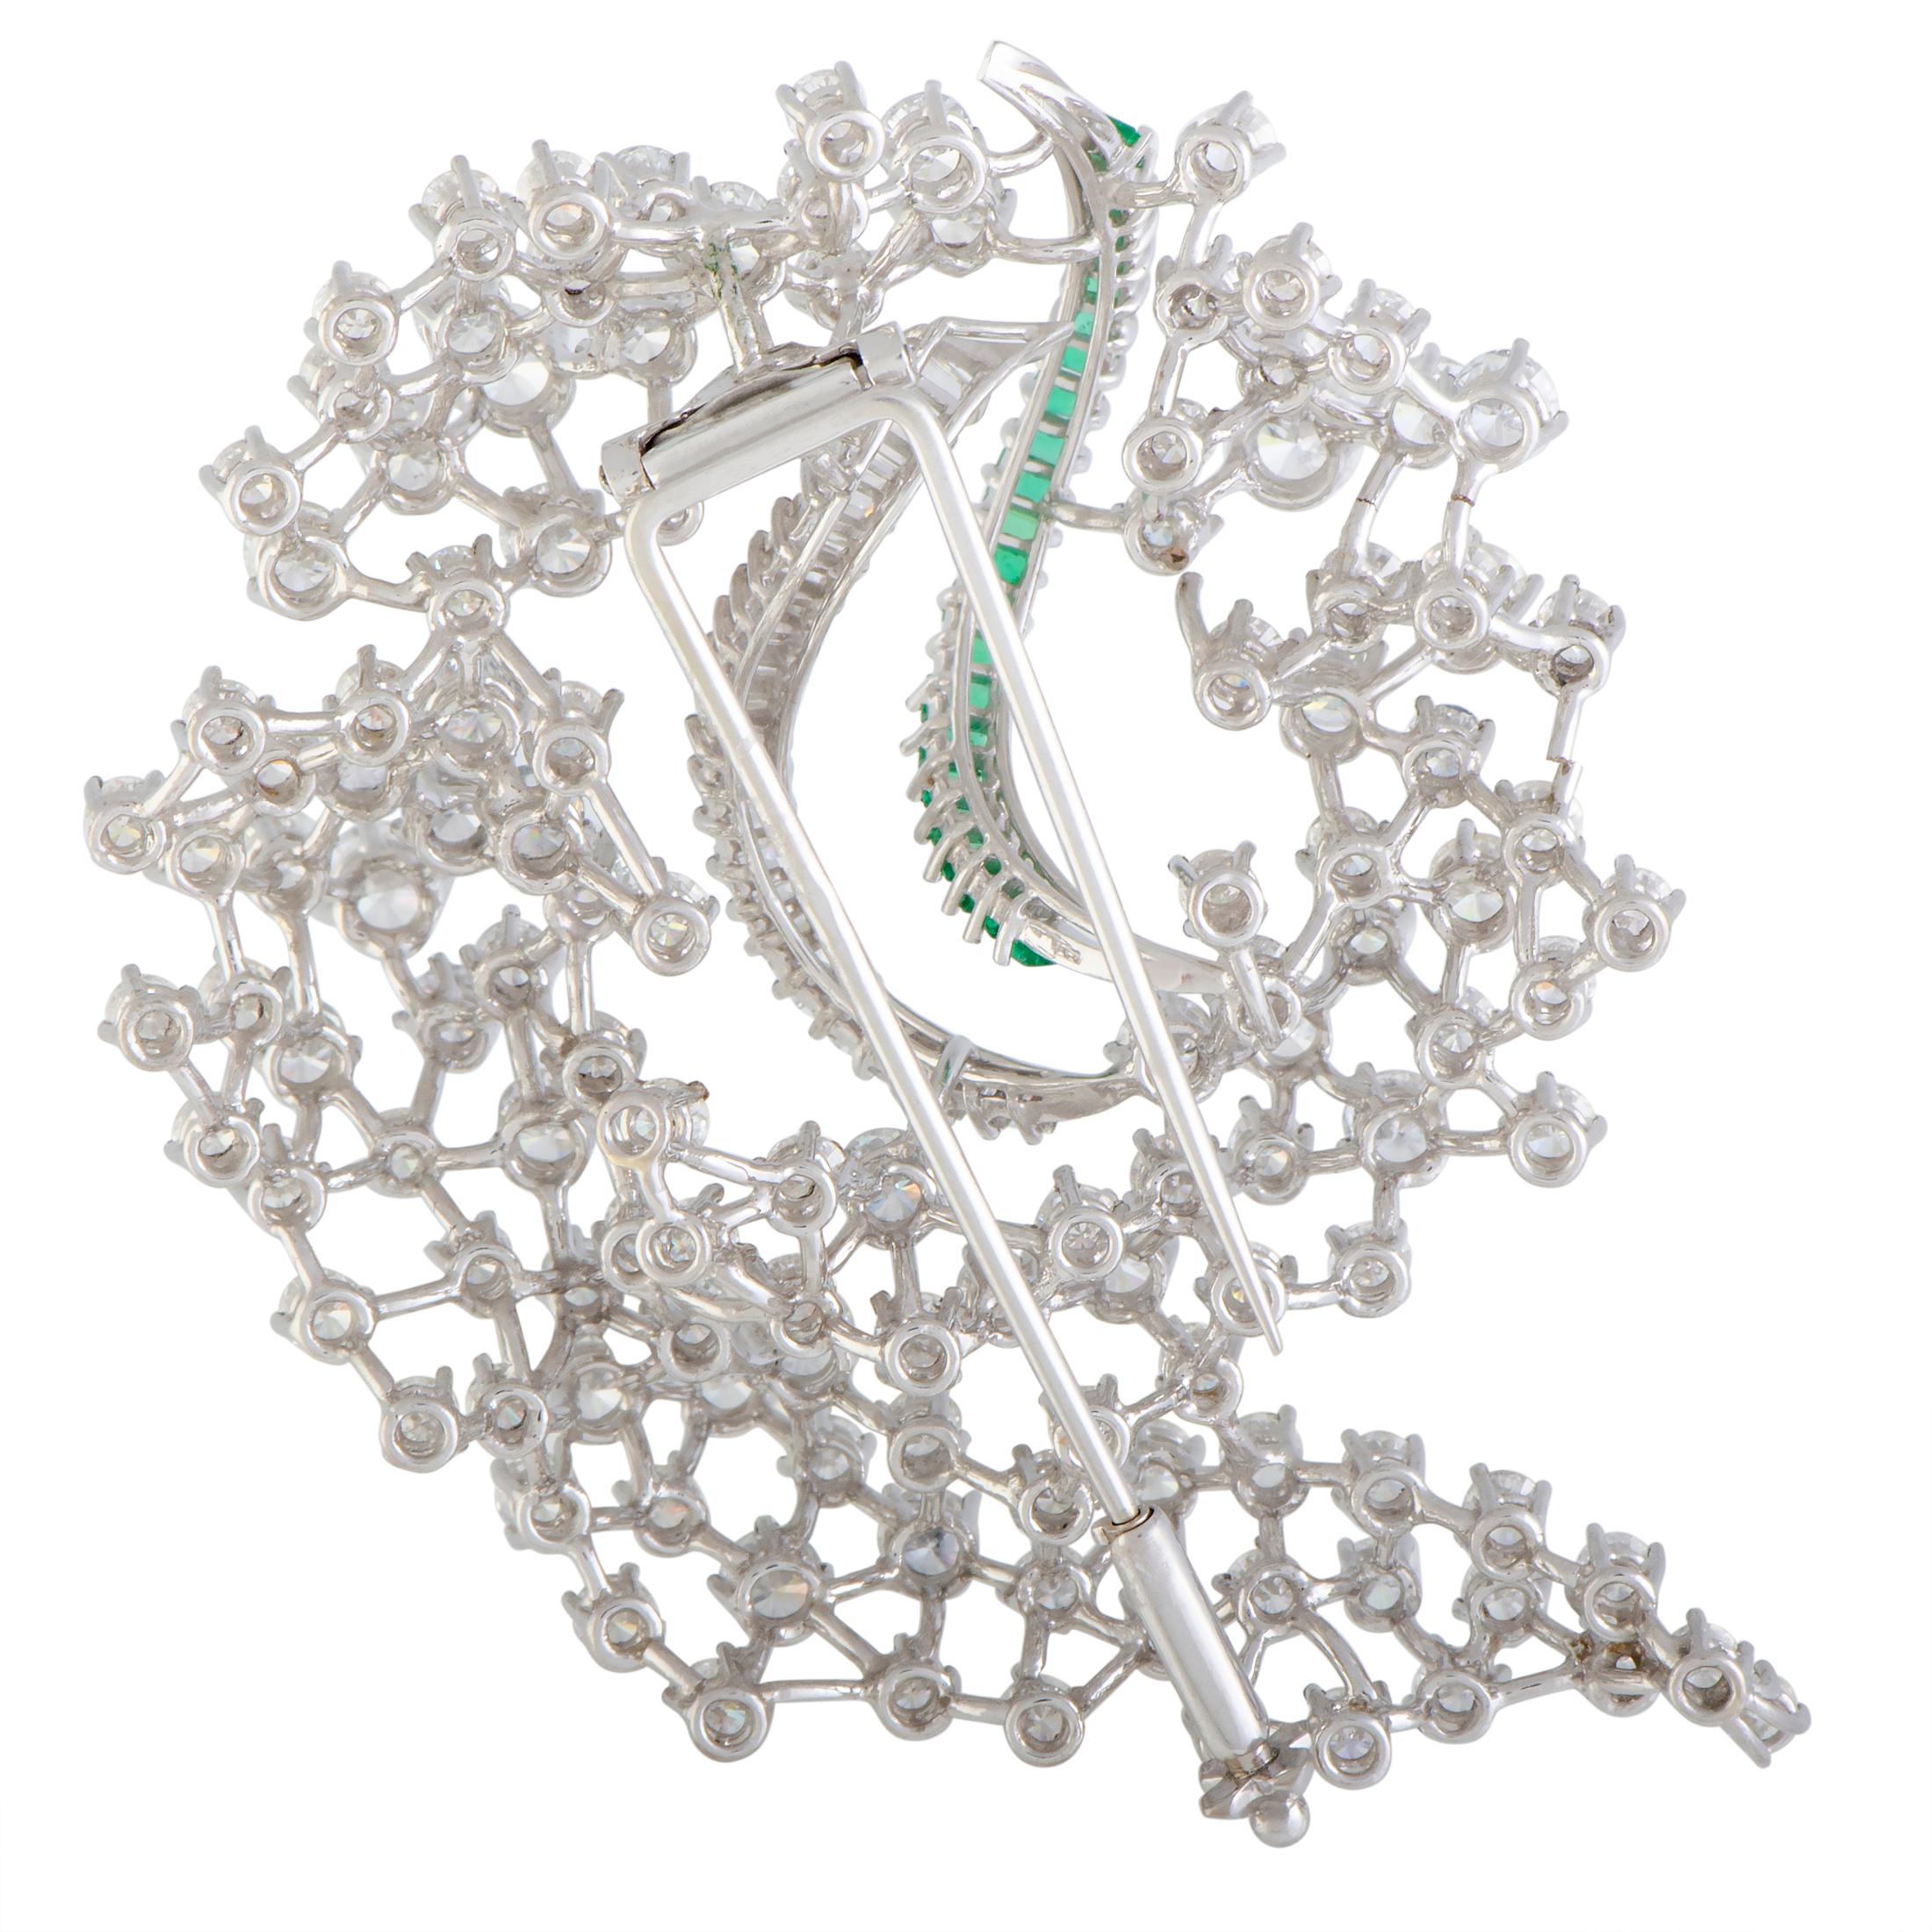 Elevate your style in a stunningly luxurious manner with this incredibly extravagant brooch that boasts an intriguingly intricate design lavishly topped off with a resplendent blend of gems. The brooch is expertly crafted from prestigious platinum